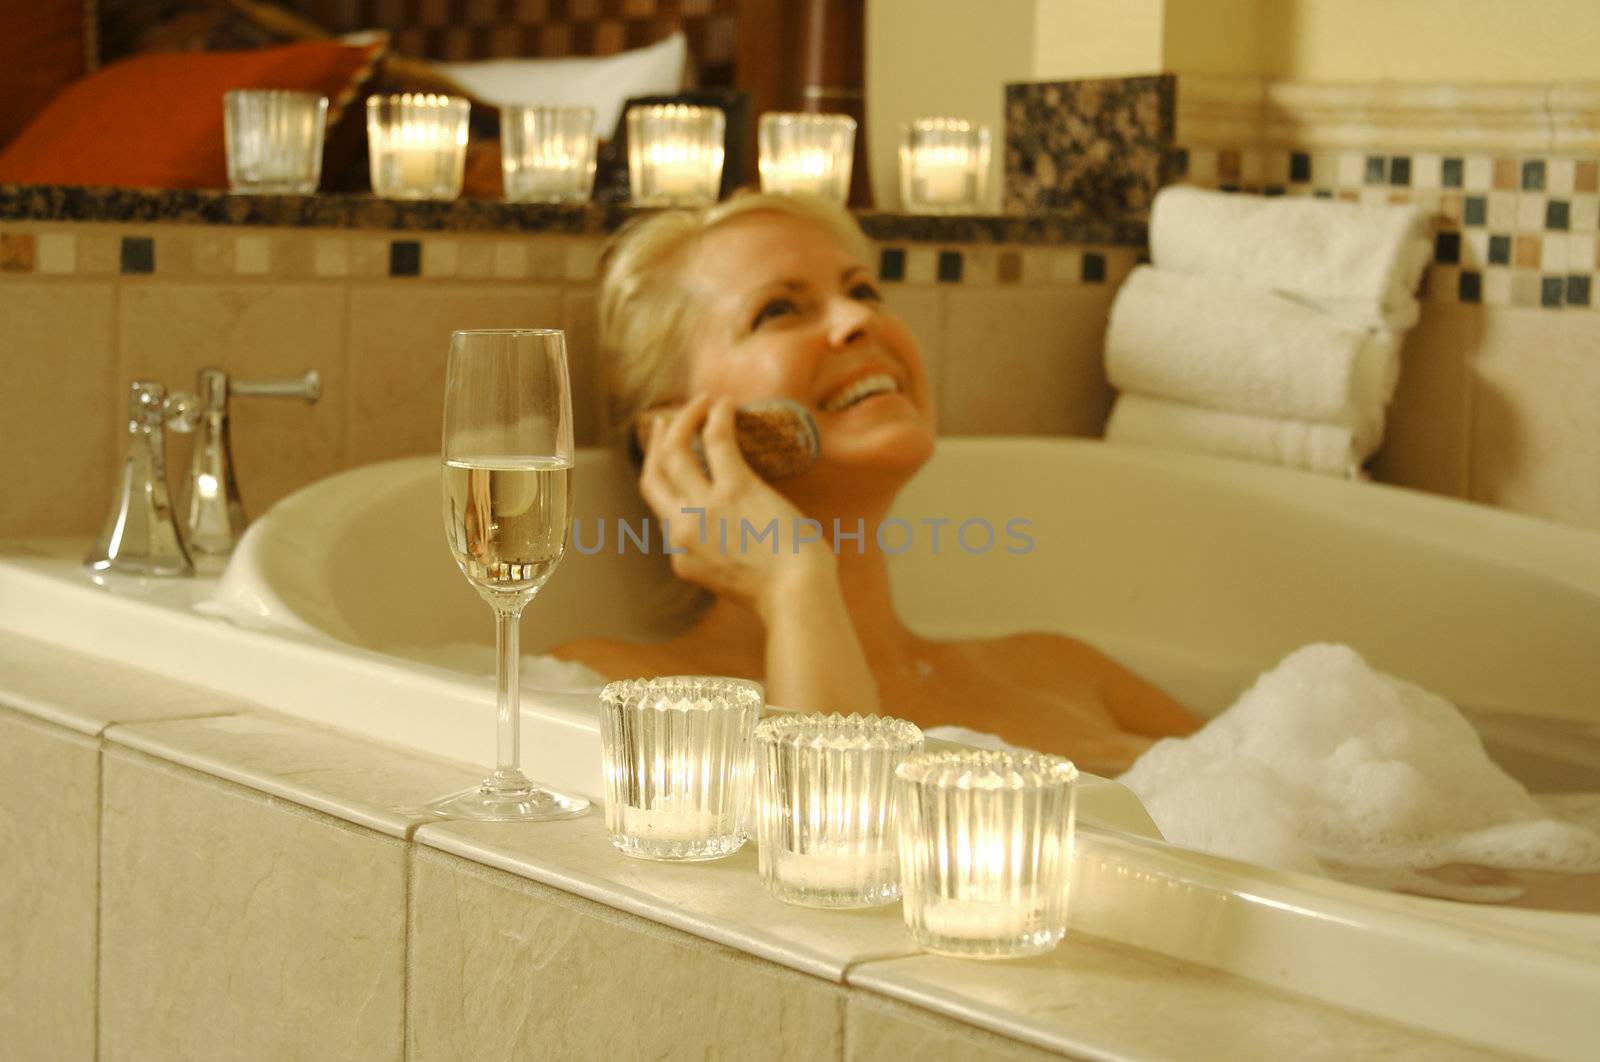 Beautiful Woman using cell phone in bubble bath with sparkling wine and candles surrounding her.